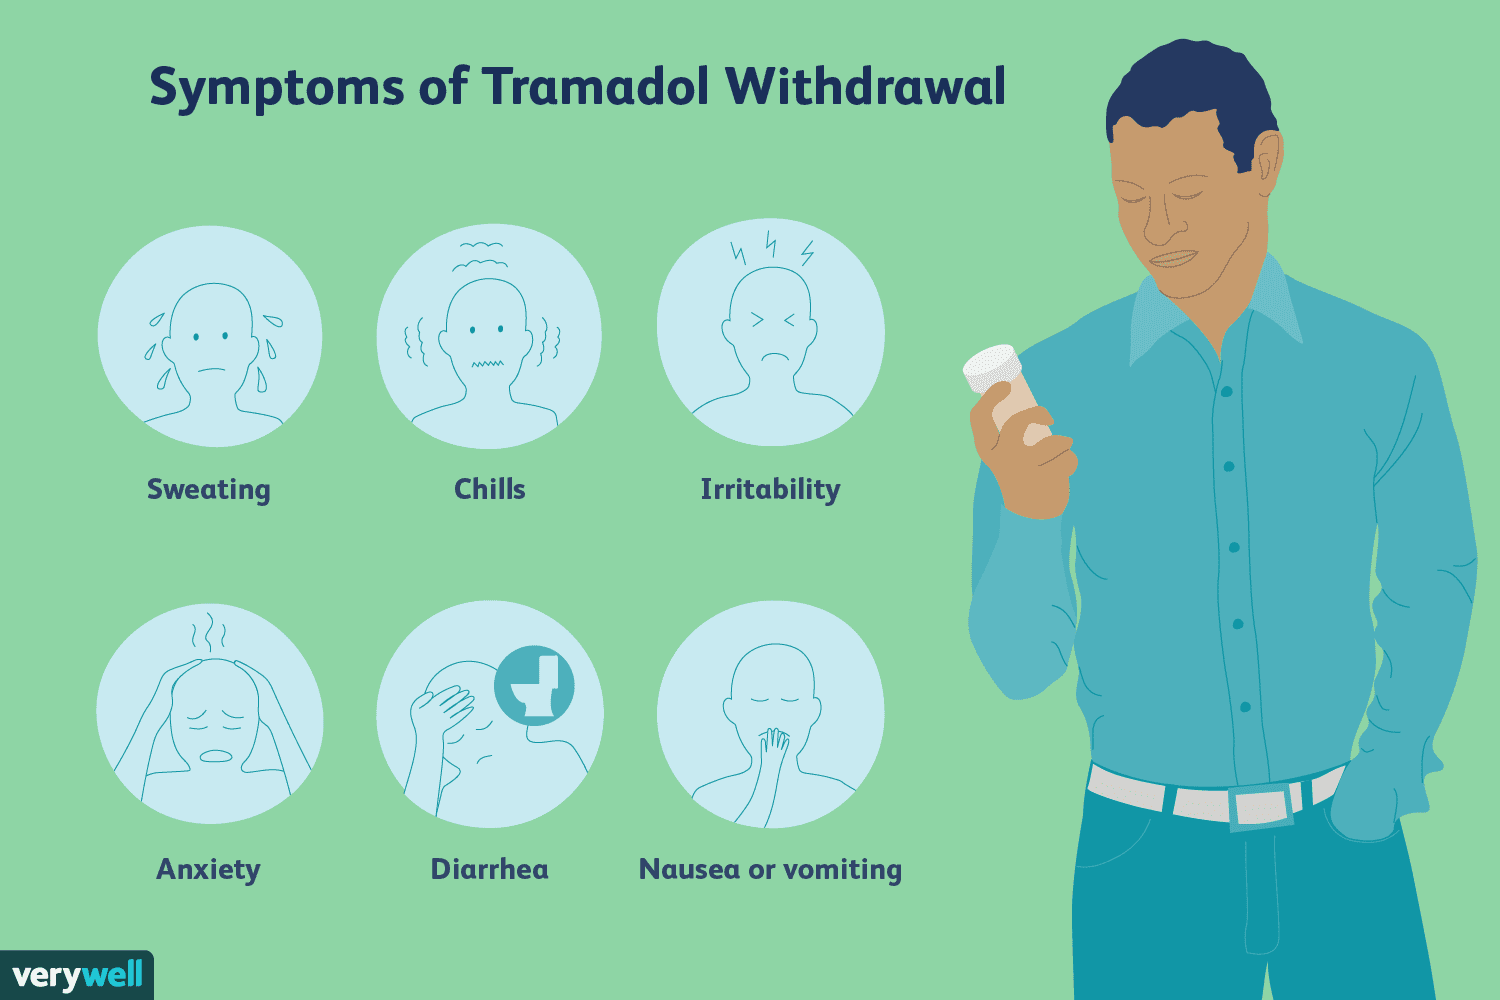 Tramadol Withdrawal: Symptoms, Timeline, and Treatment